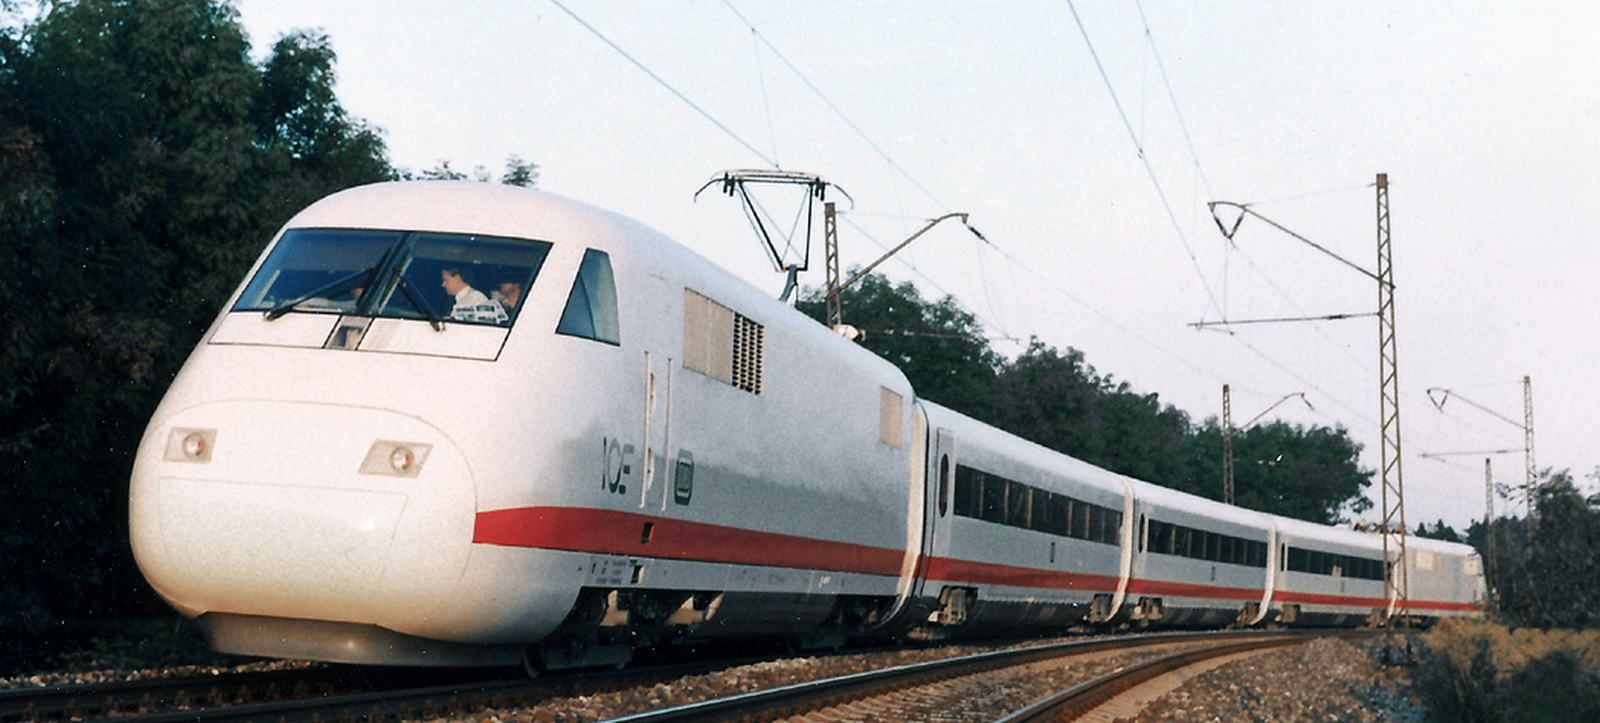 The train directly after delivery in September 1985 on the Karlsfeld-Olching line